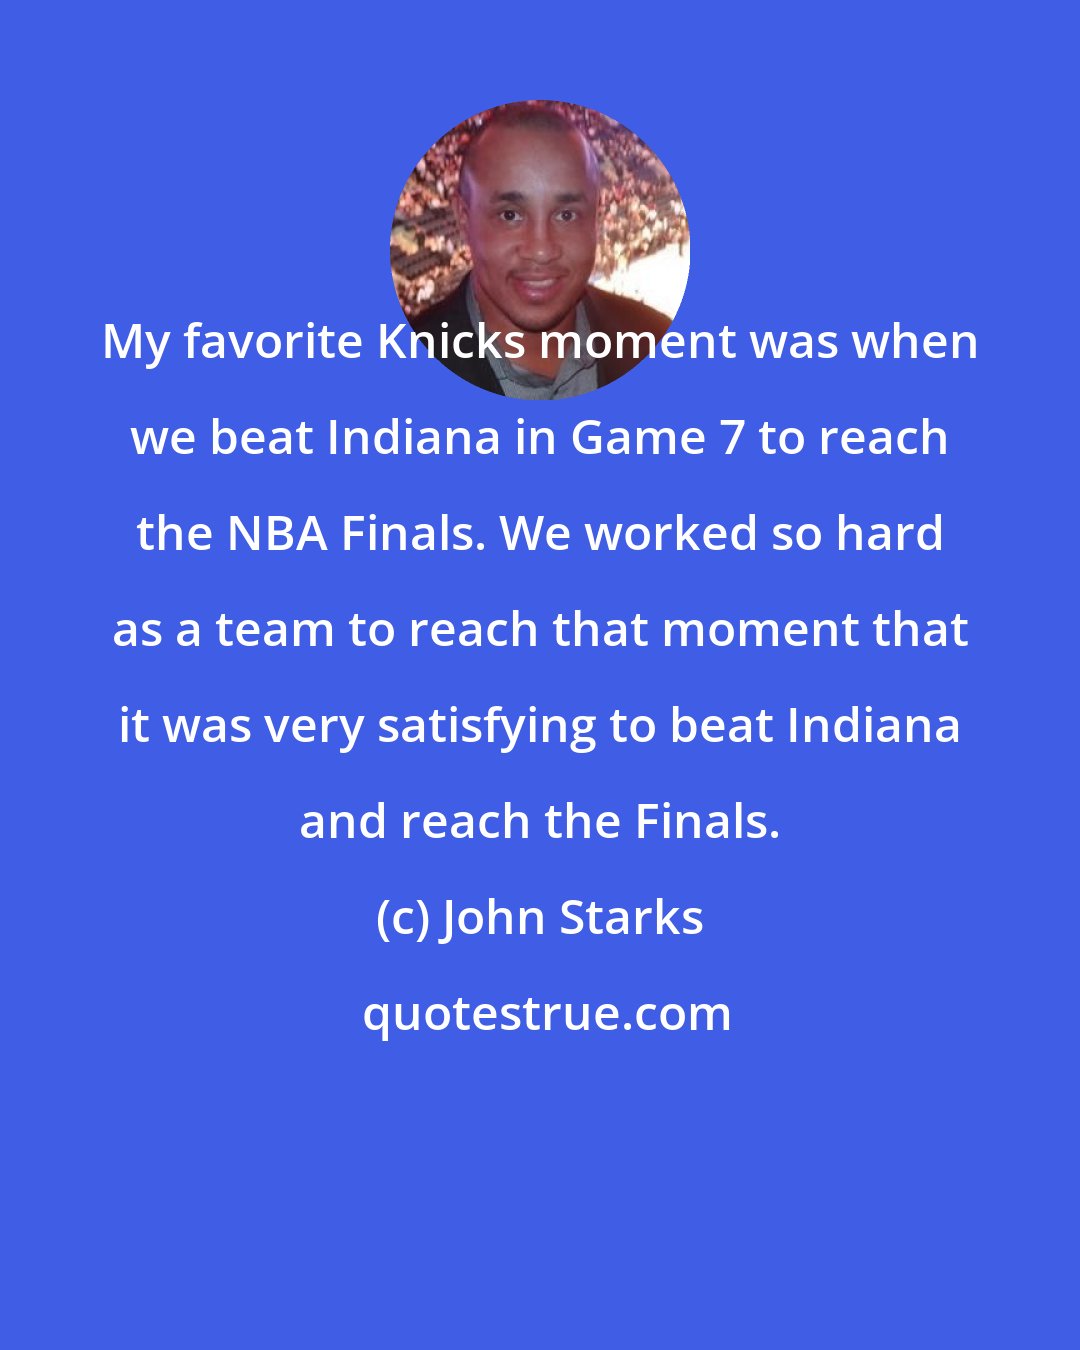 John Starks: My favorite Knicks moment was when we beat Indiana in Game 7 to reach the NBA Finals. We worked so hard as a team to reach that moment that it was very satisfying to beat Indiana and reach the Finals.